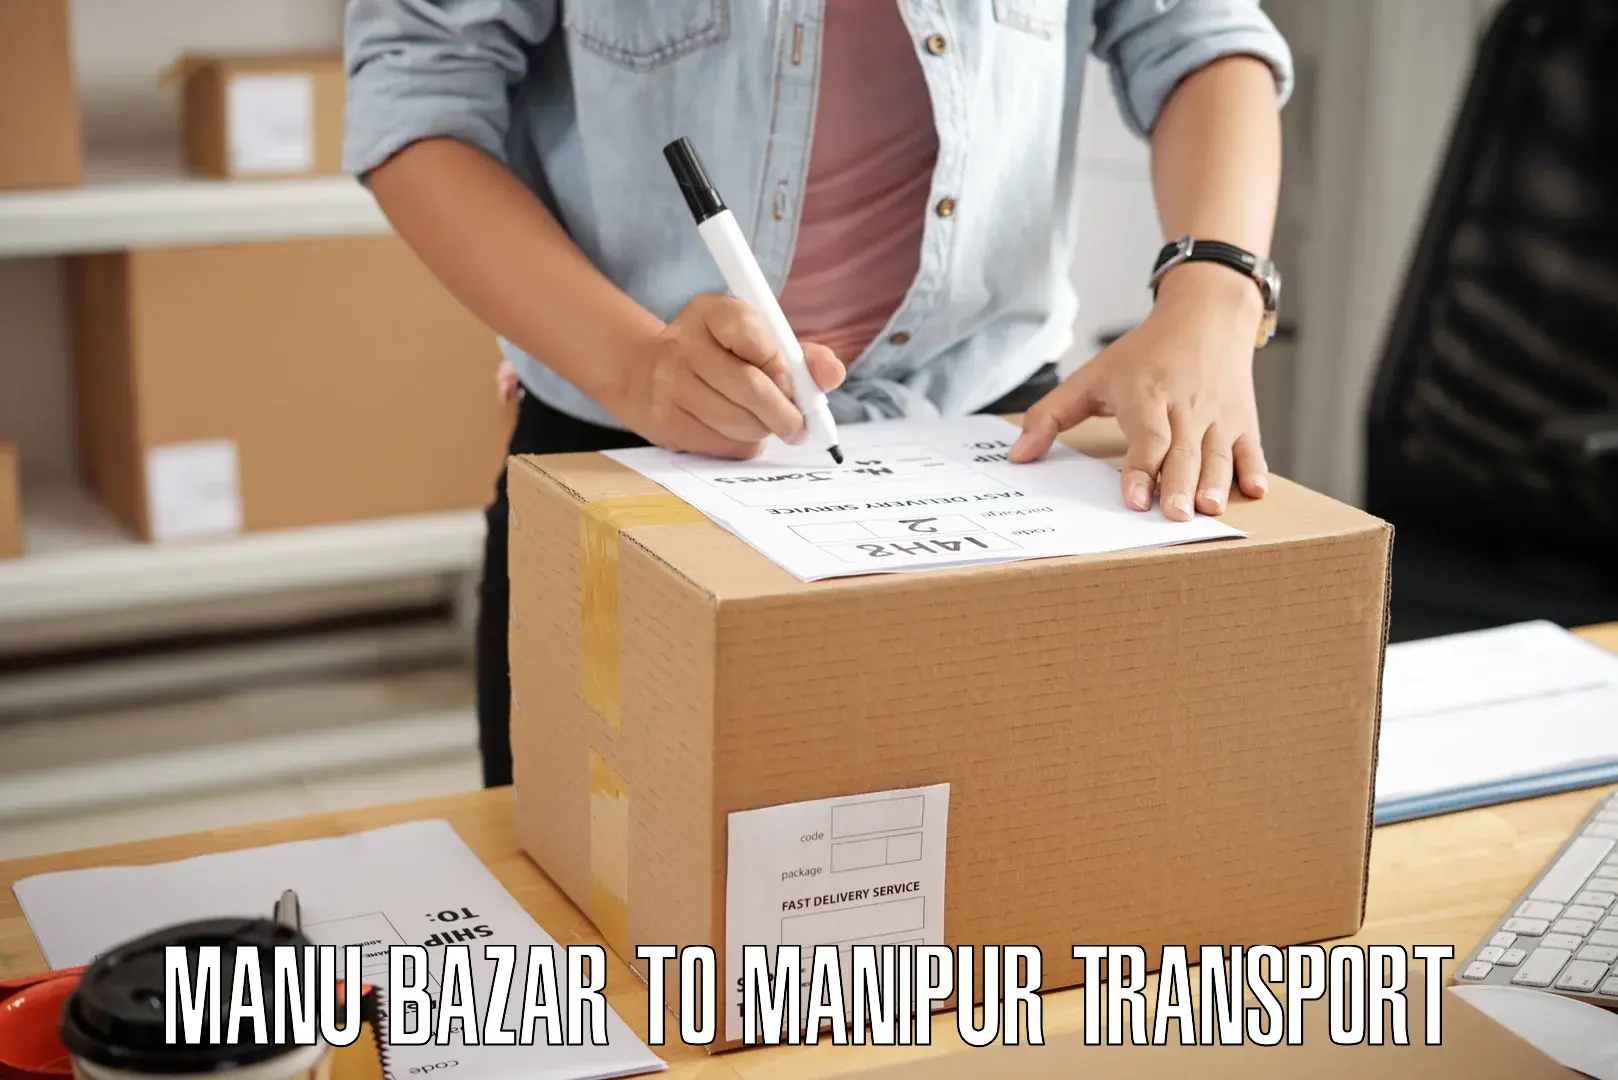 Container transportation services Manu Bazar to Manipur